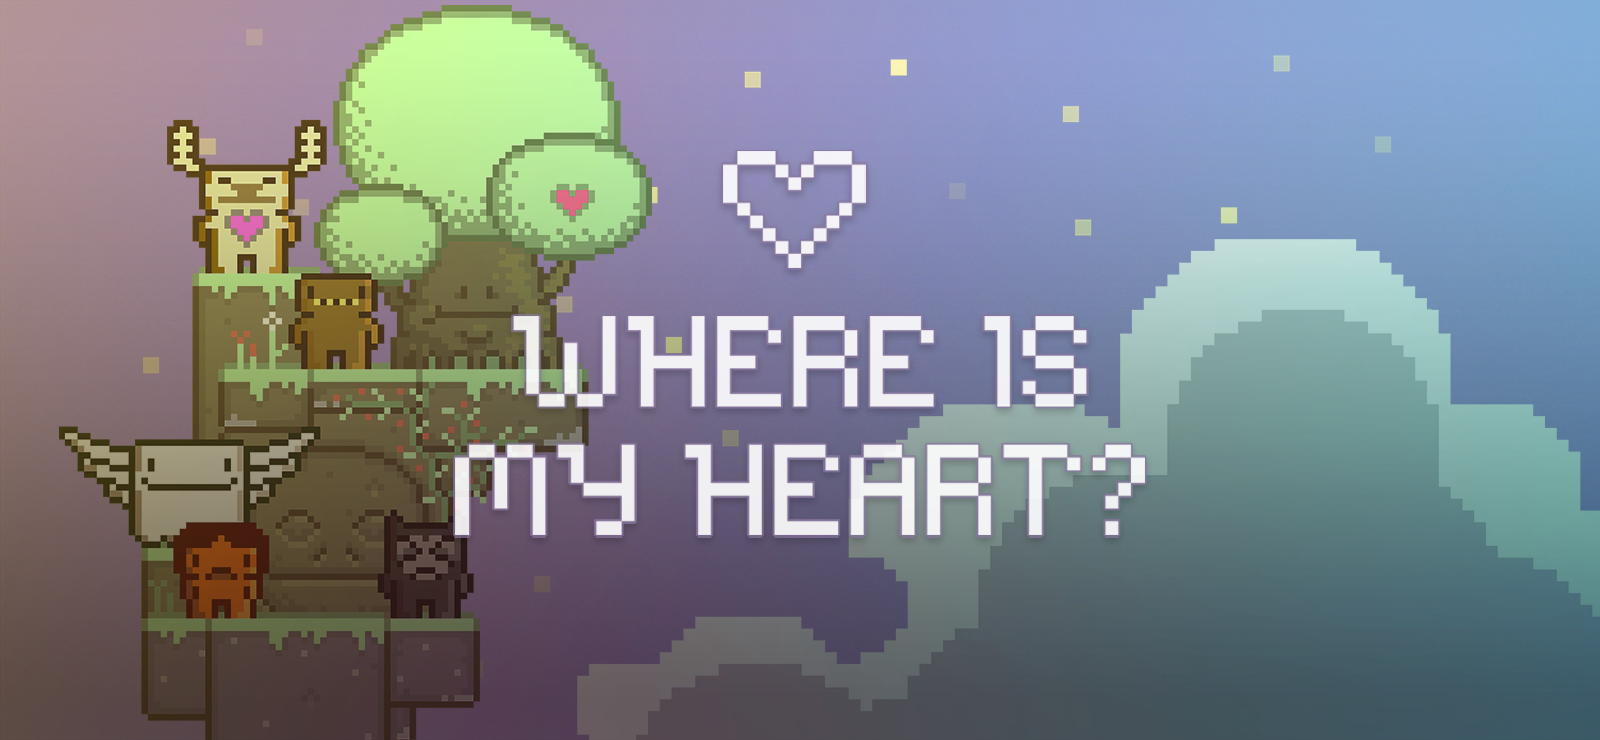 Where Is My Heart?